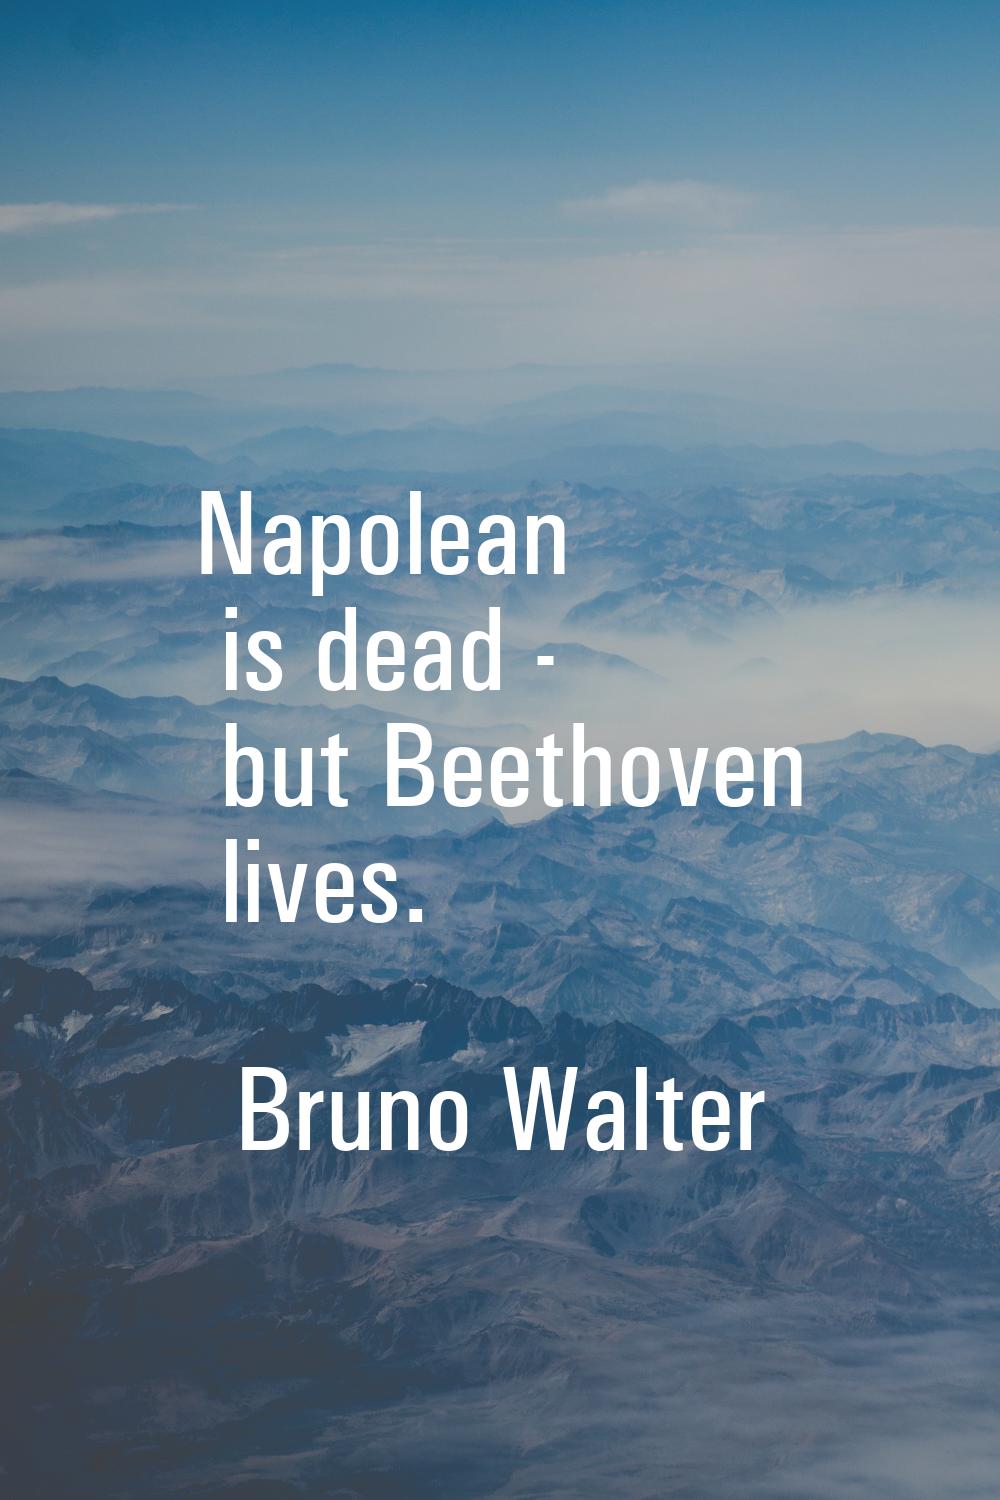 Napolean is dead - but Beethoven lives.